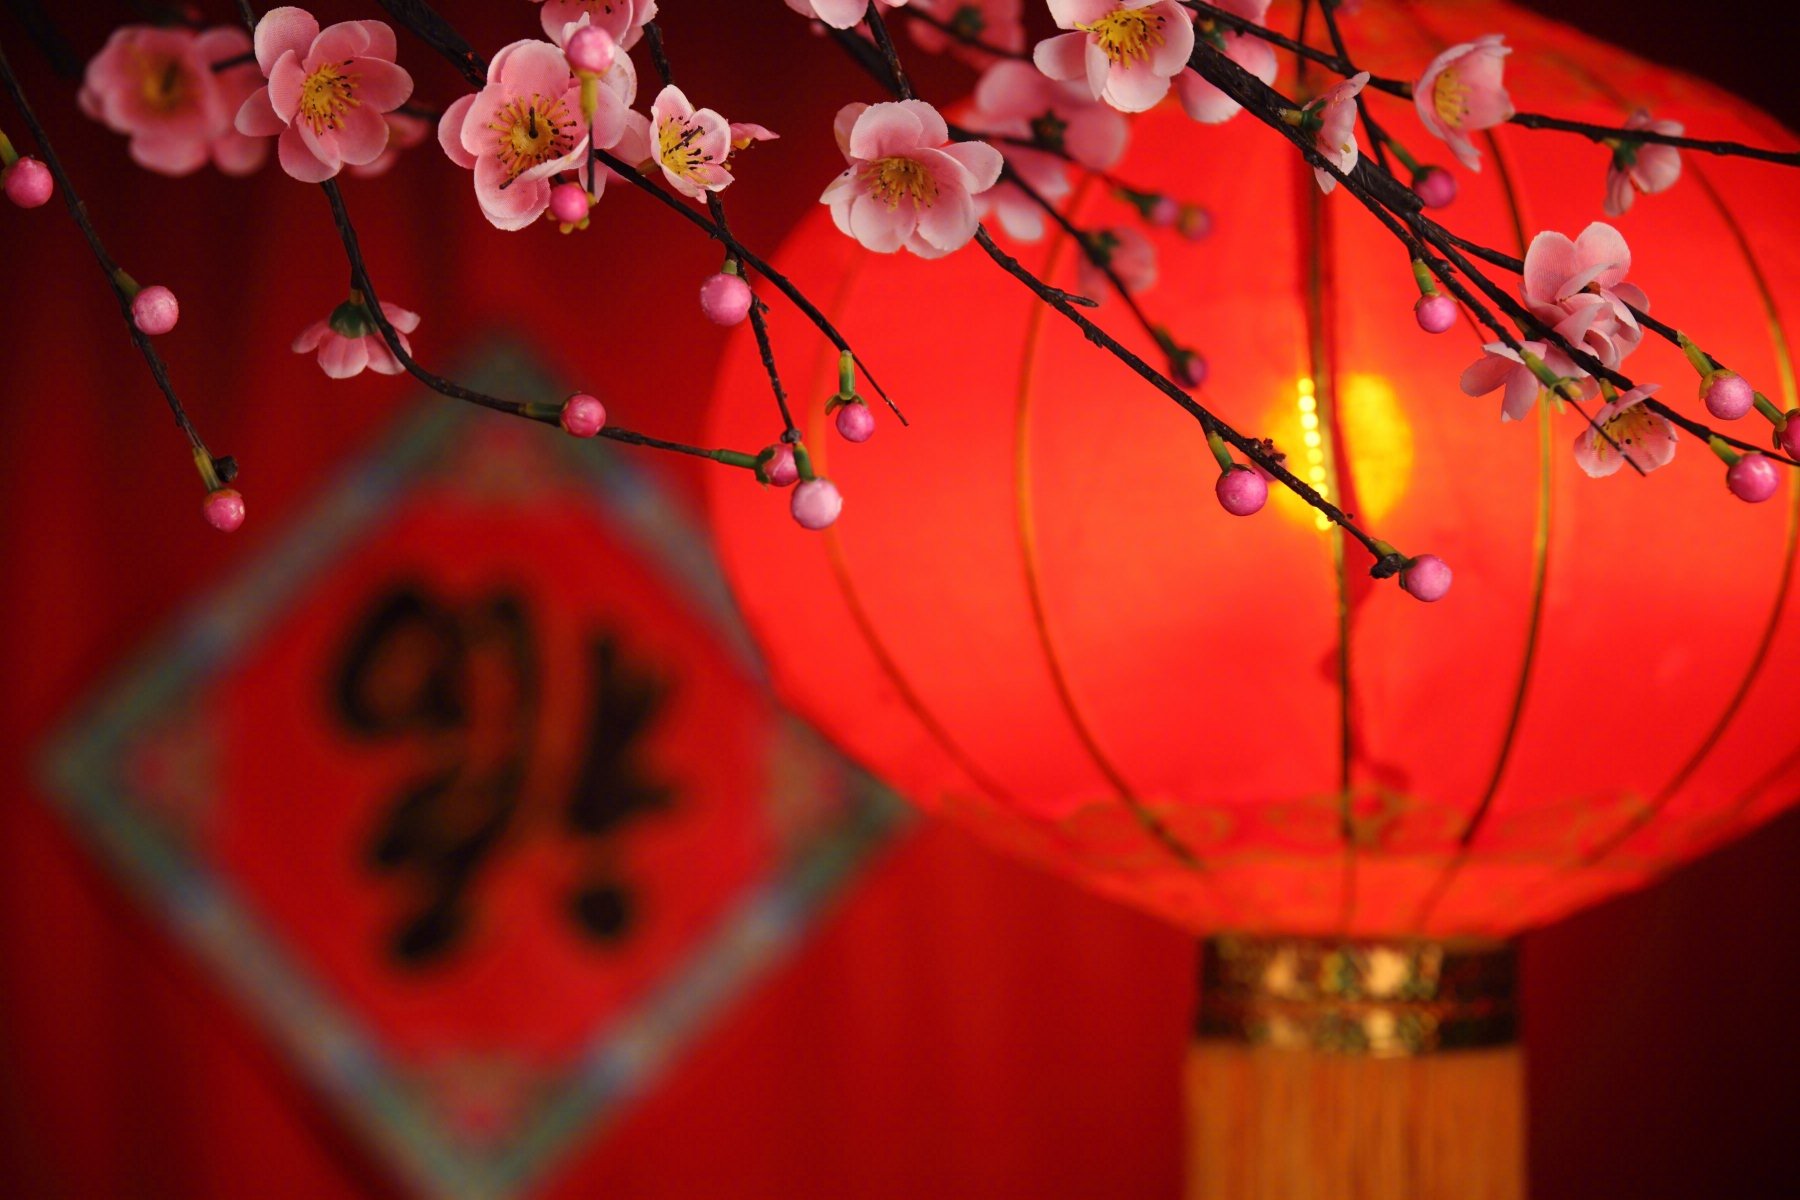 JD.com Hosts a Very Special Chinese New Year Celebration For 11th Consecutive Year